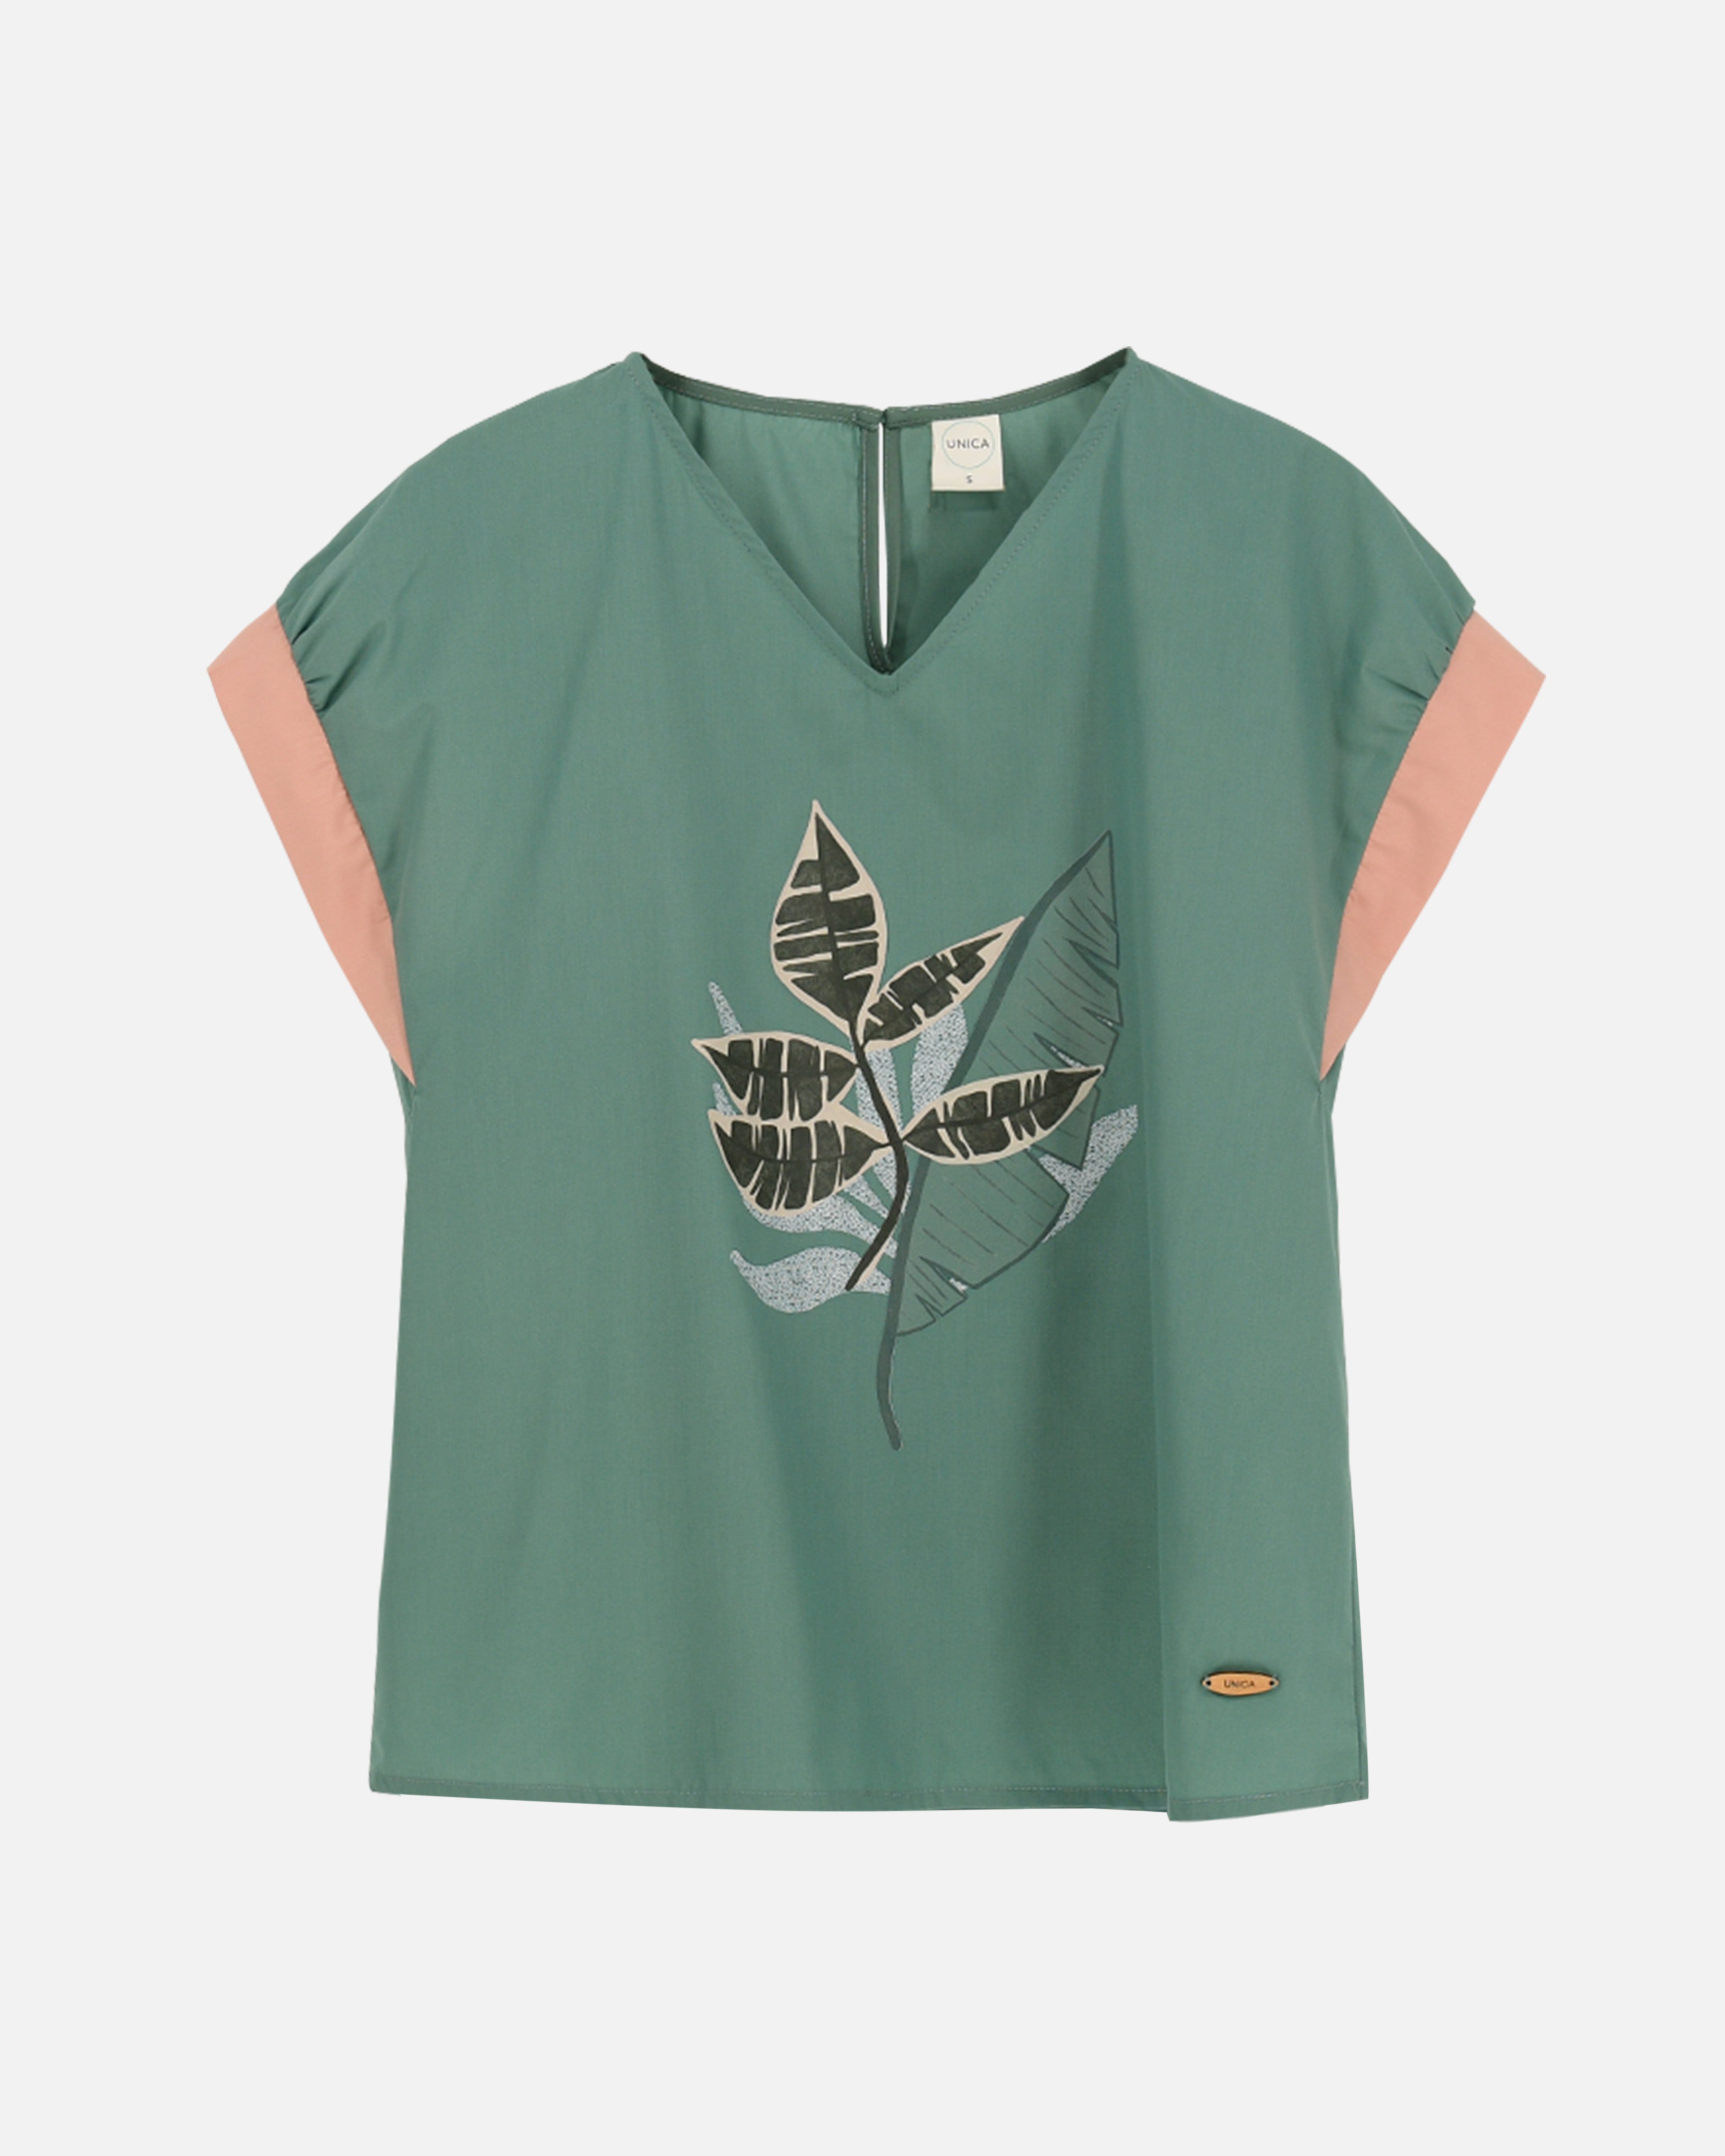 UNICA x WWF Tops MICHELLE Top XS / Green